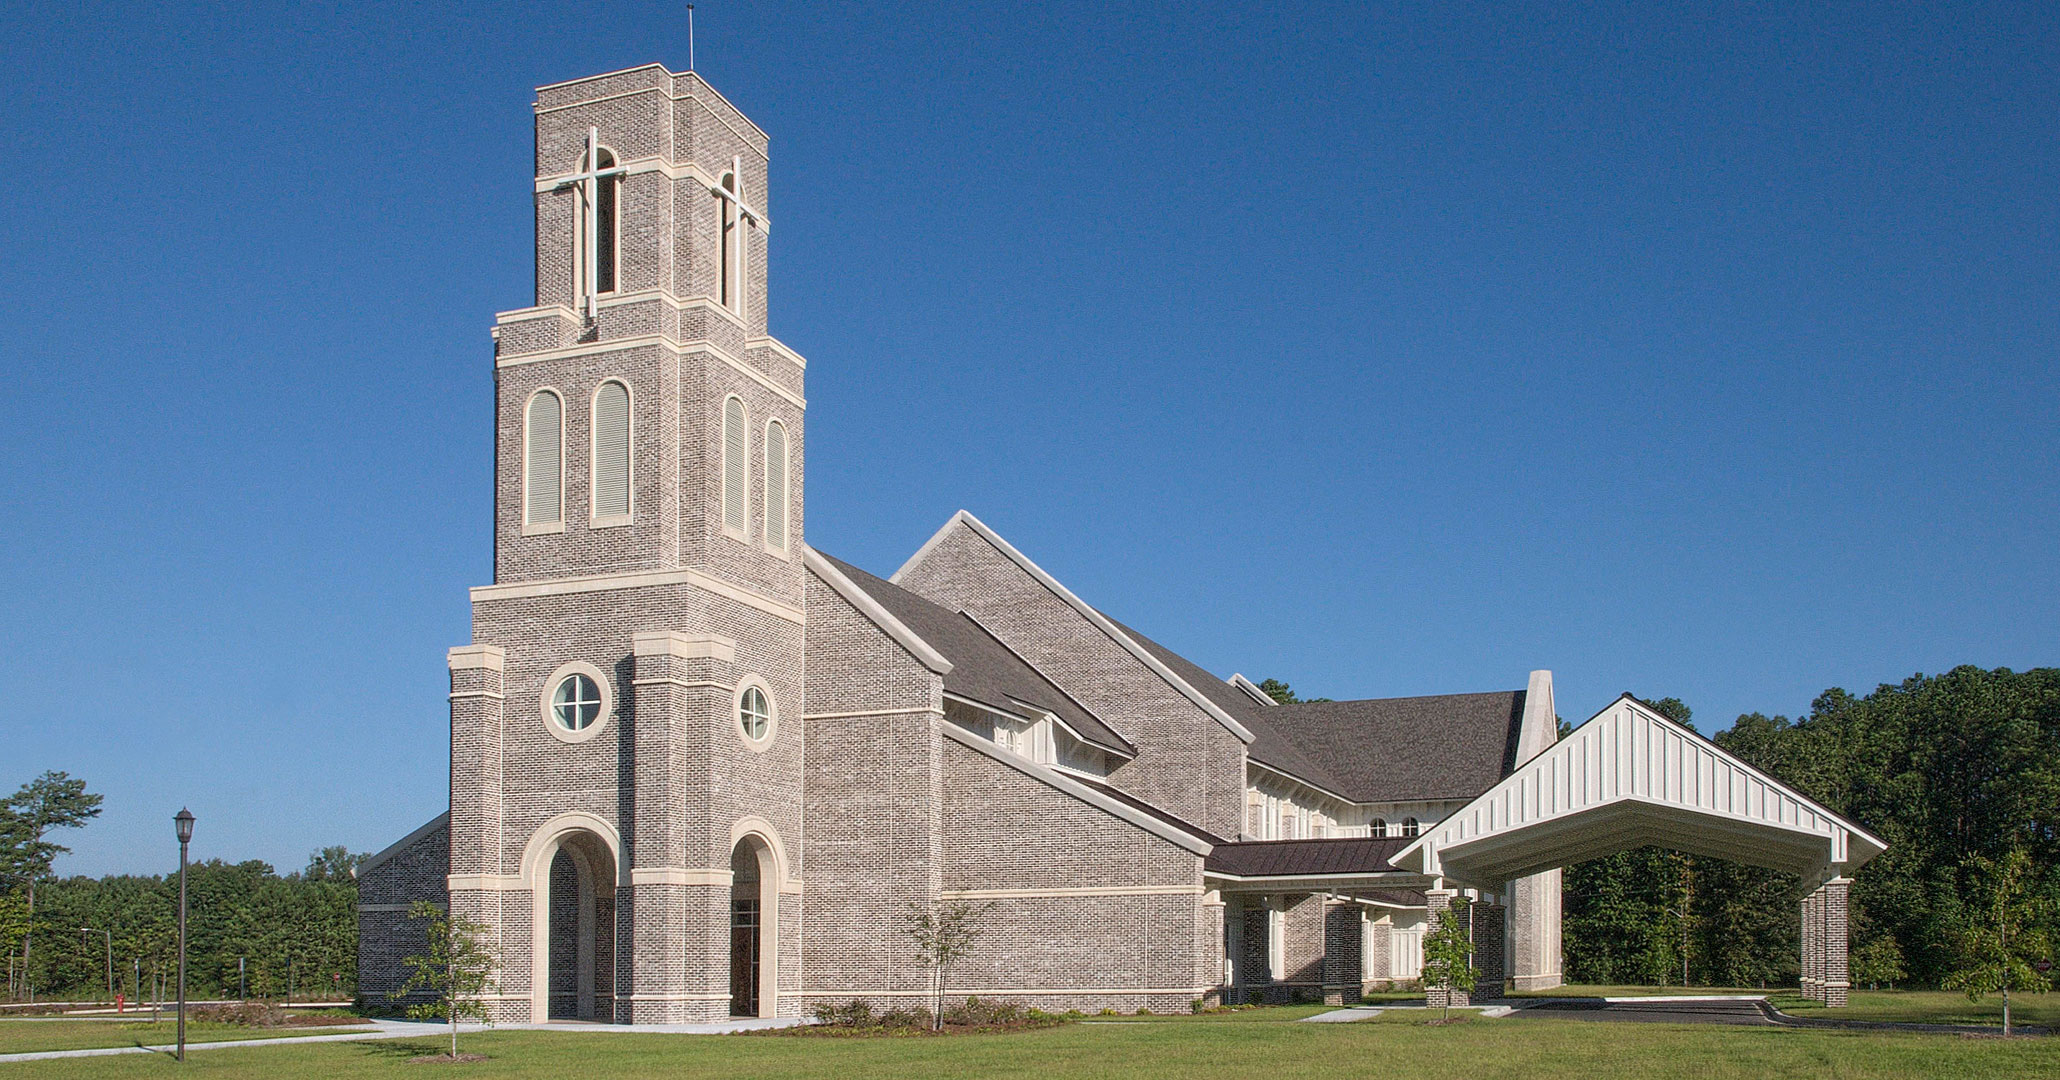 Boudreaux architects worked with St. Anne in Richmond Hill, GA to design an expansion at the church.